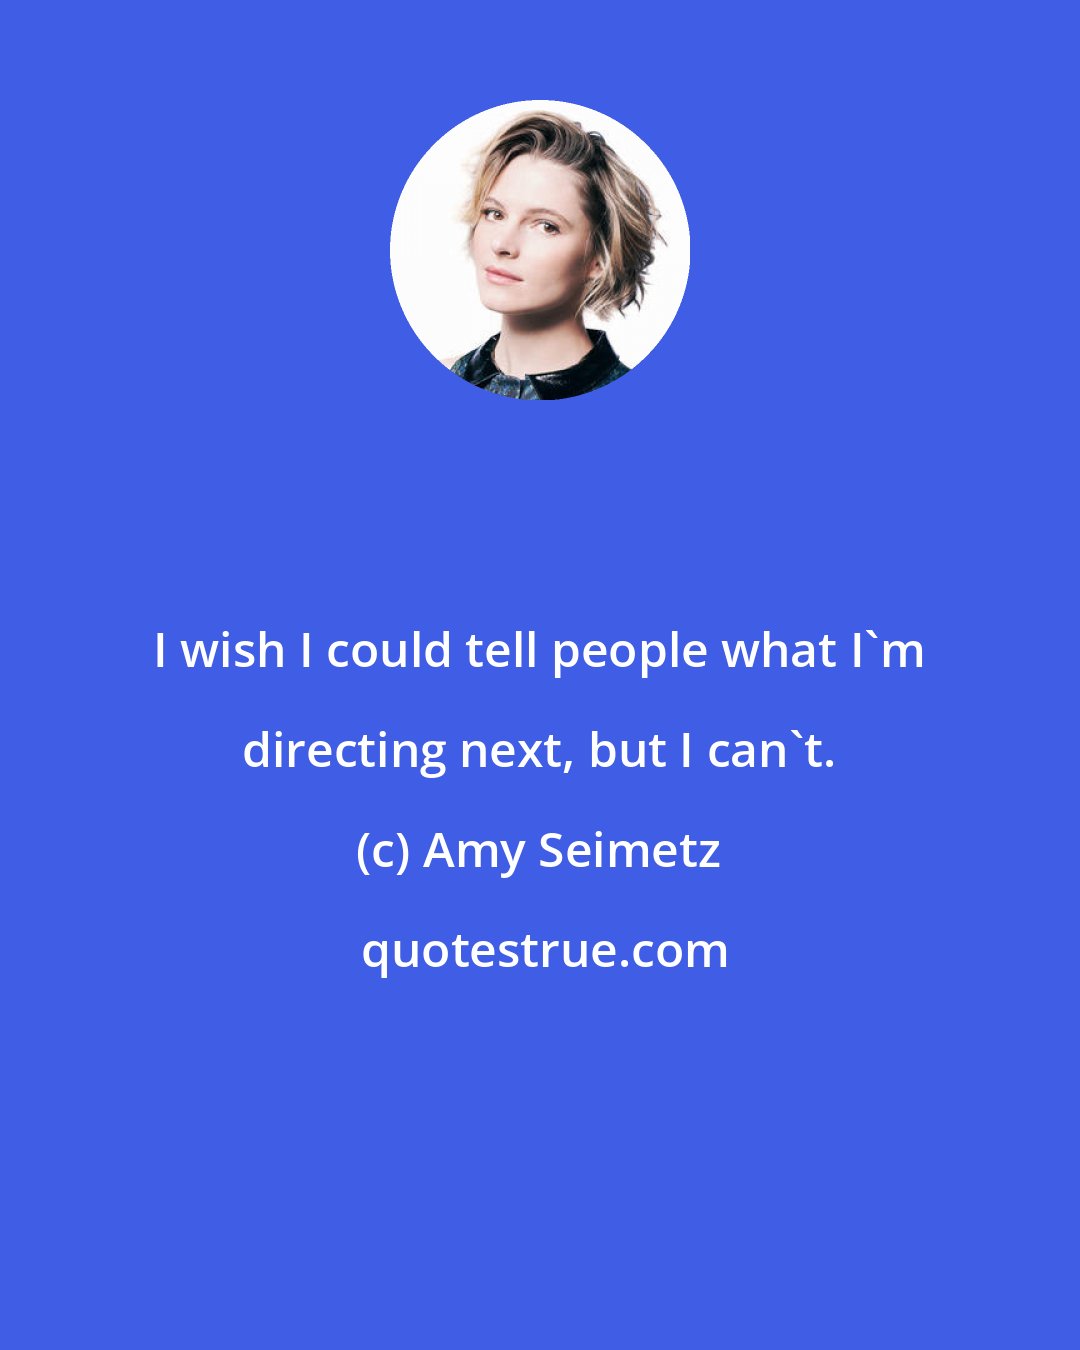 Amy Seimetz: I wish I could tell people what I'm directing next, but I can't.